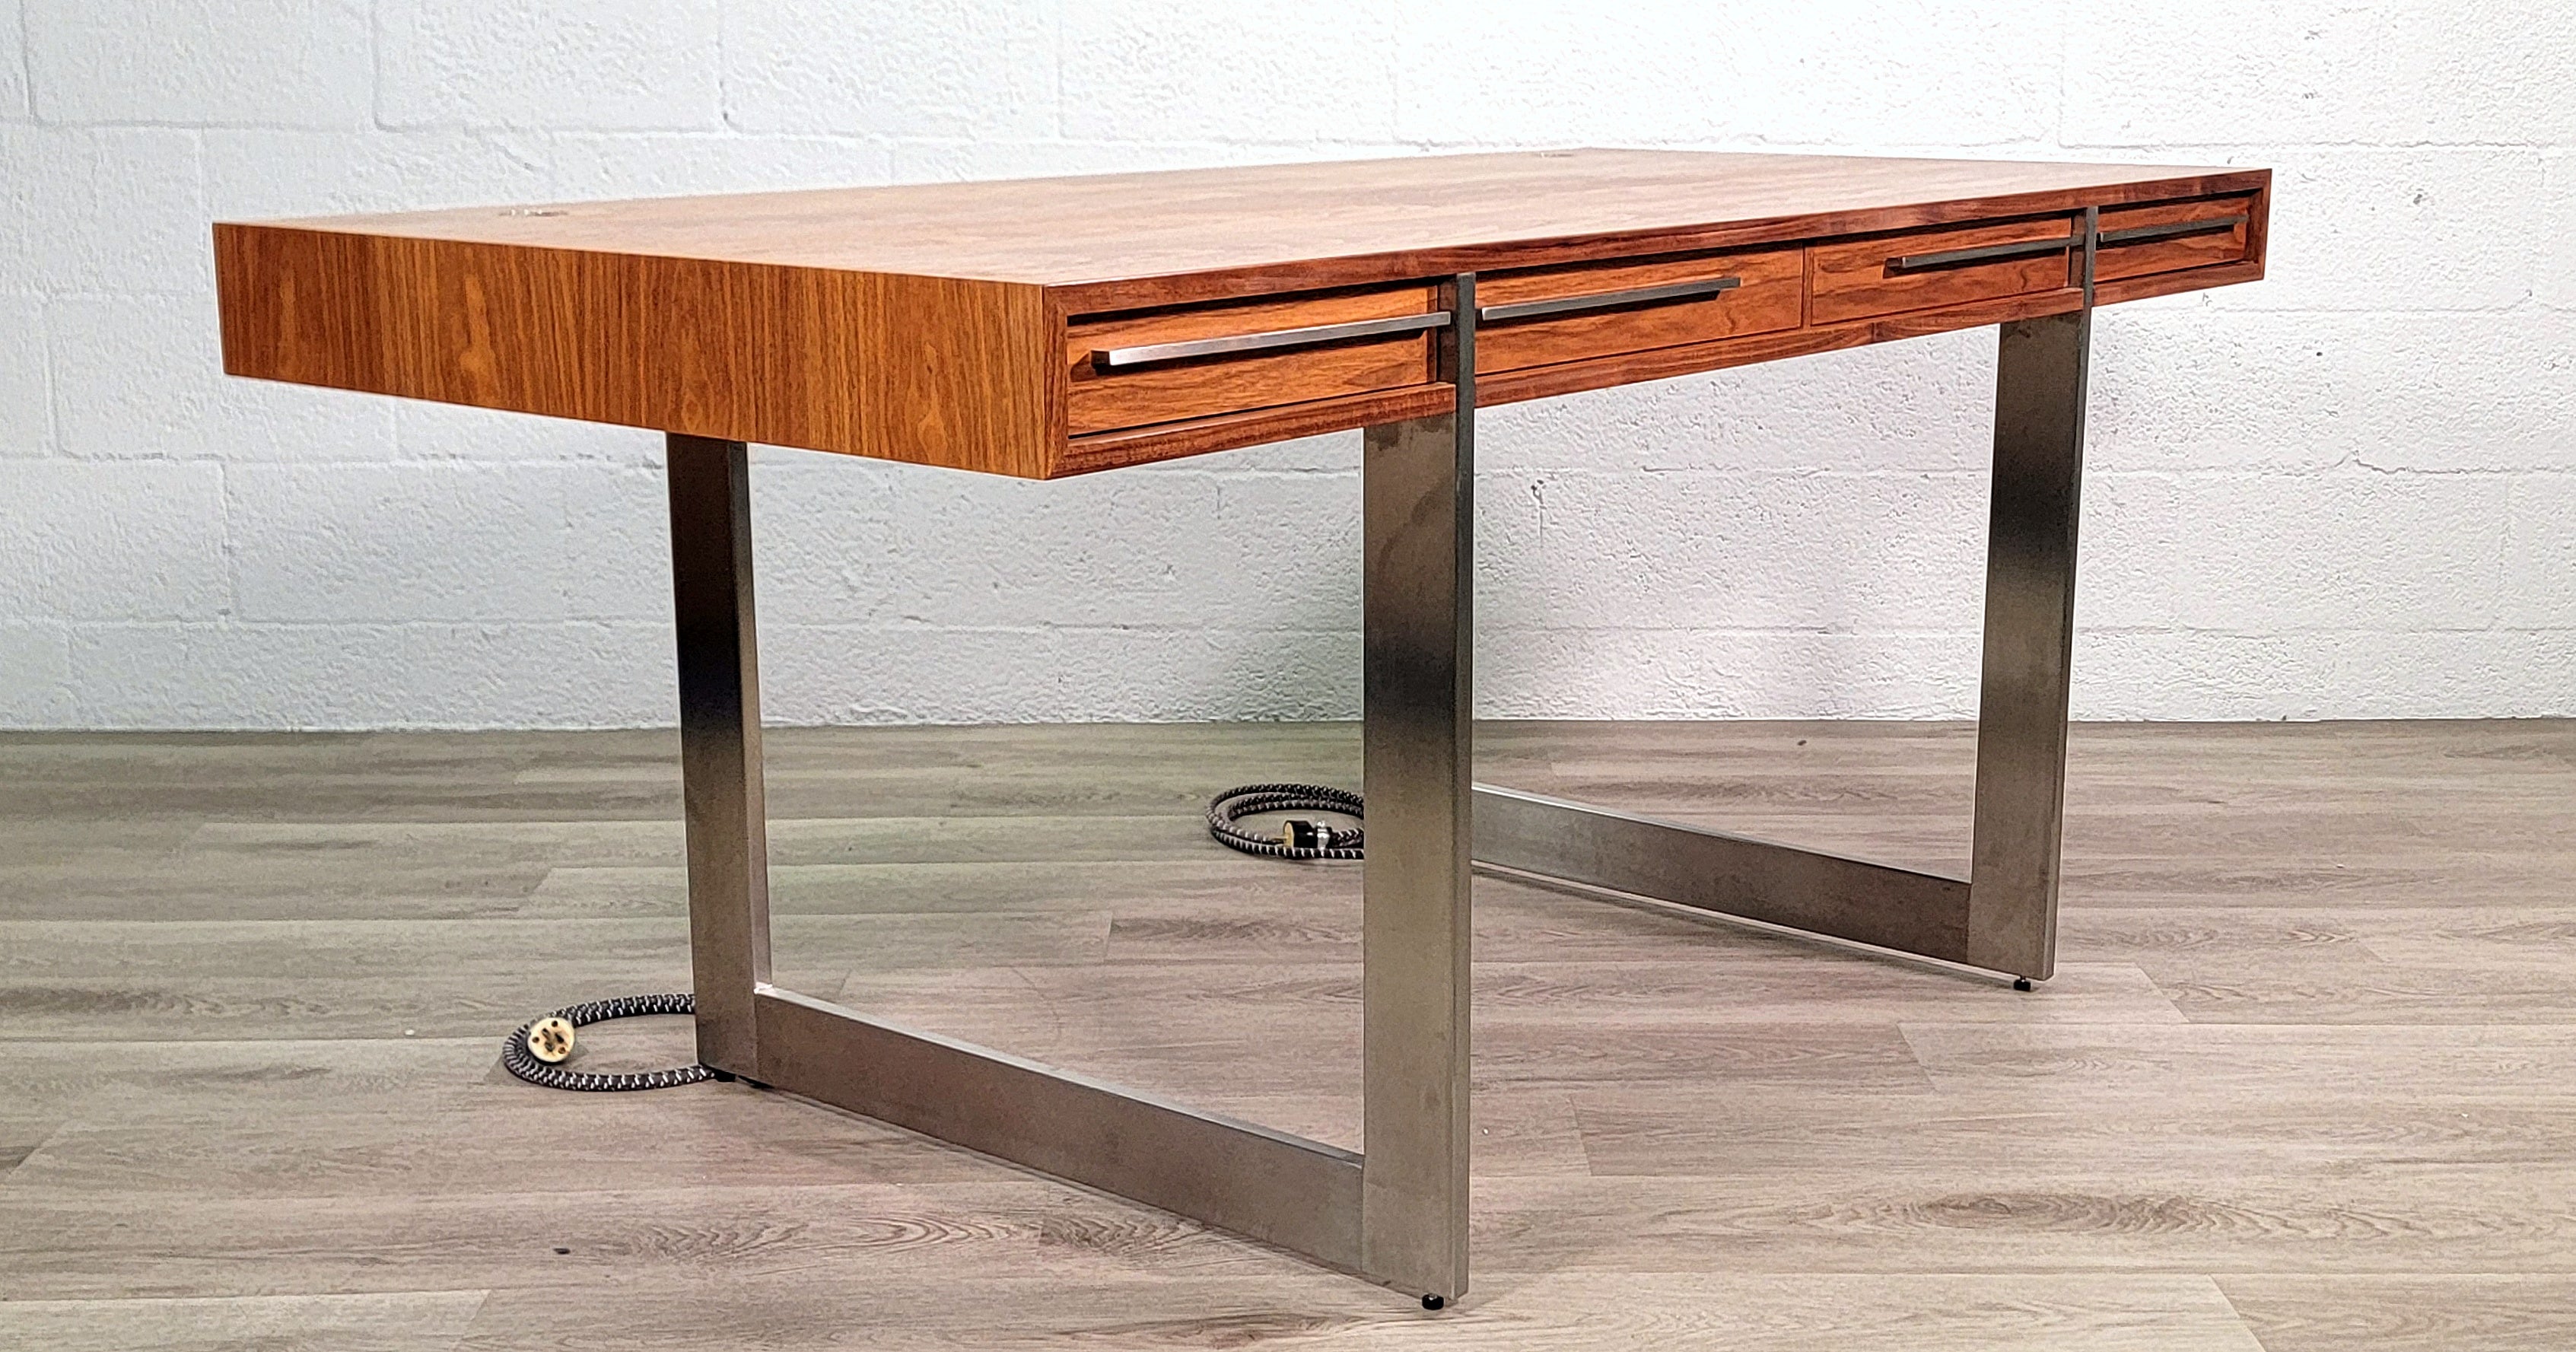 This beautiful desk is modern furniture at its finest. Make a statement in any office. The solid walnut wood top of this desk is supported by an elegant stainless steel frame. Top includes drawers with organization for all the little necessities.